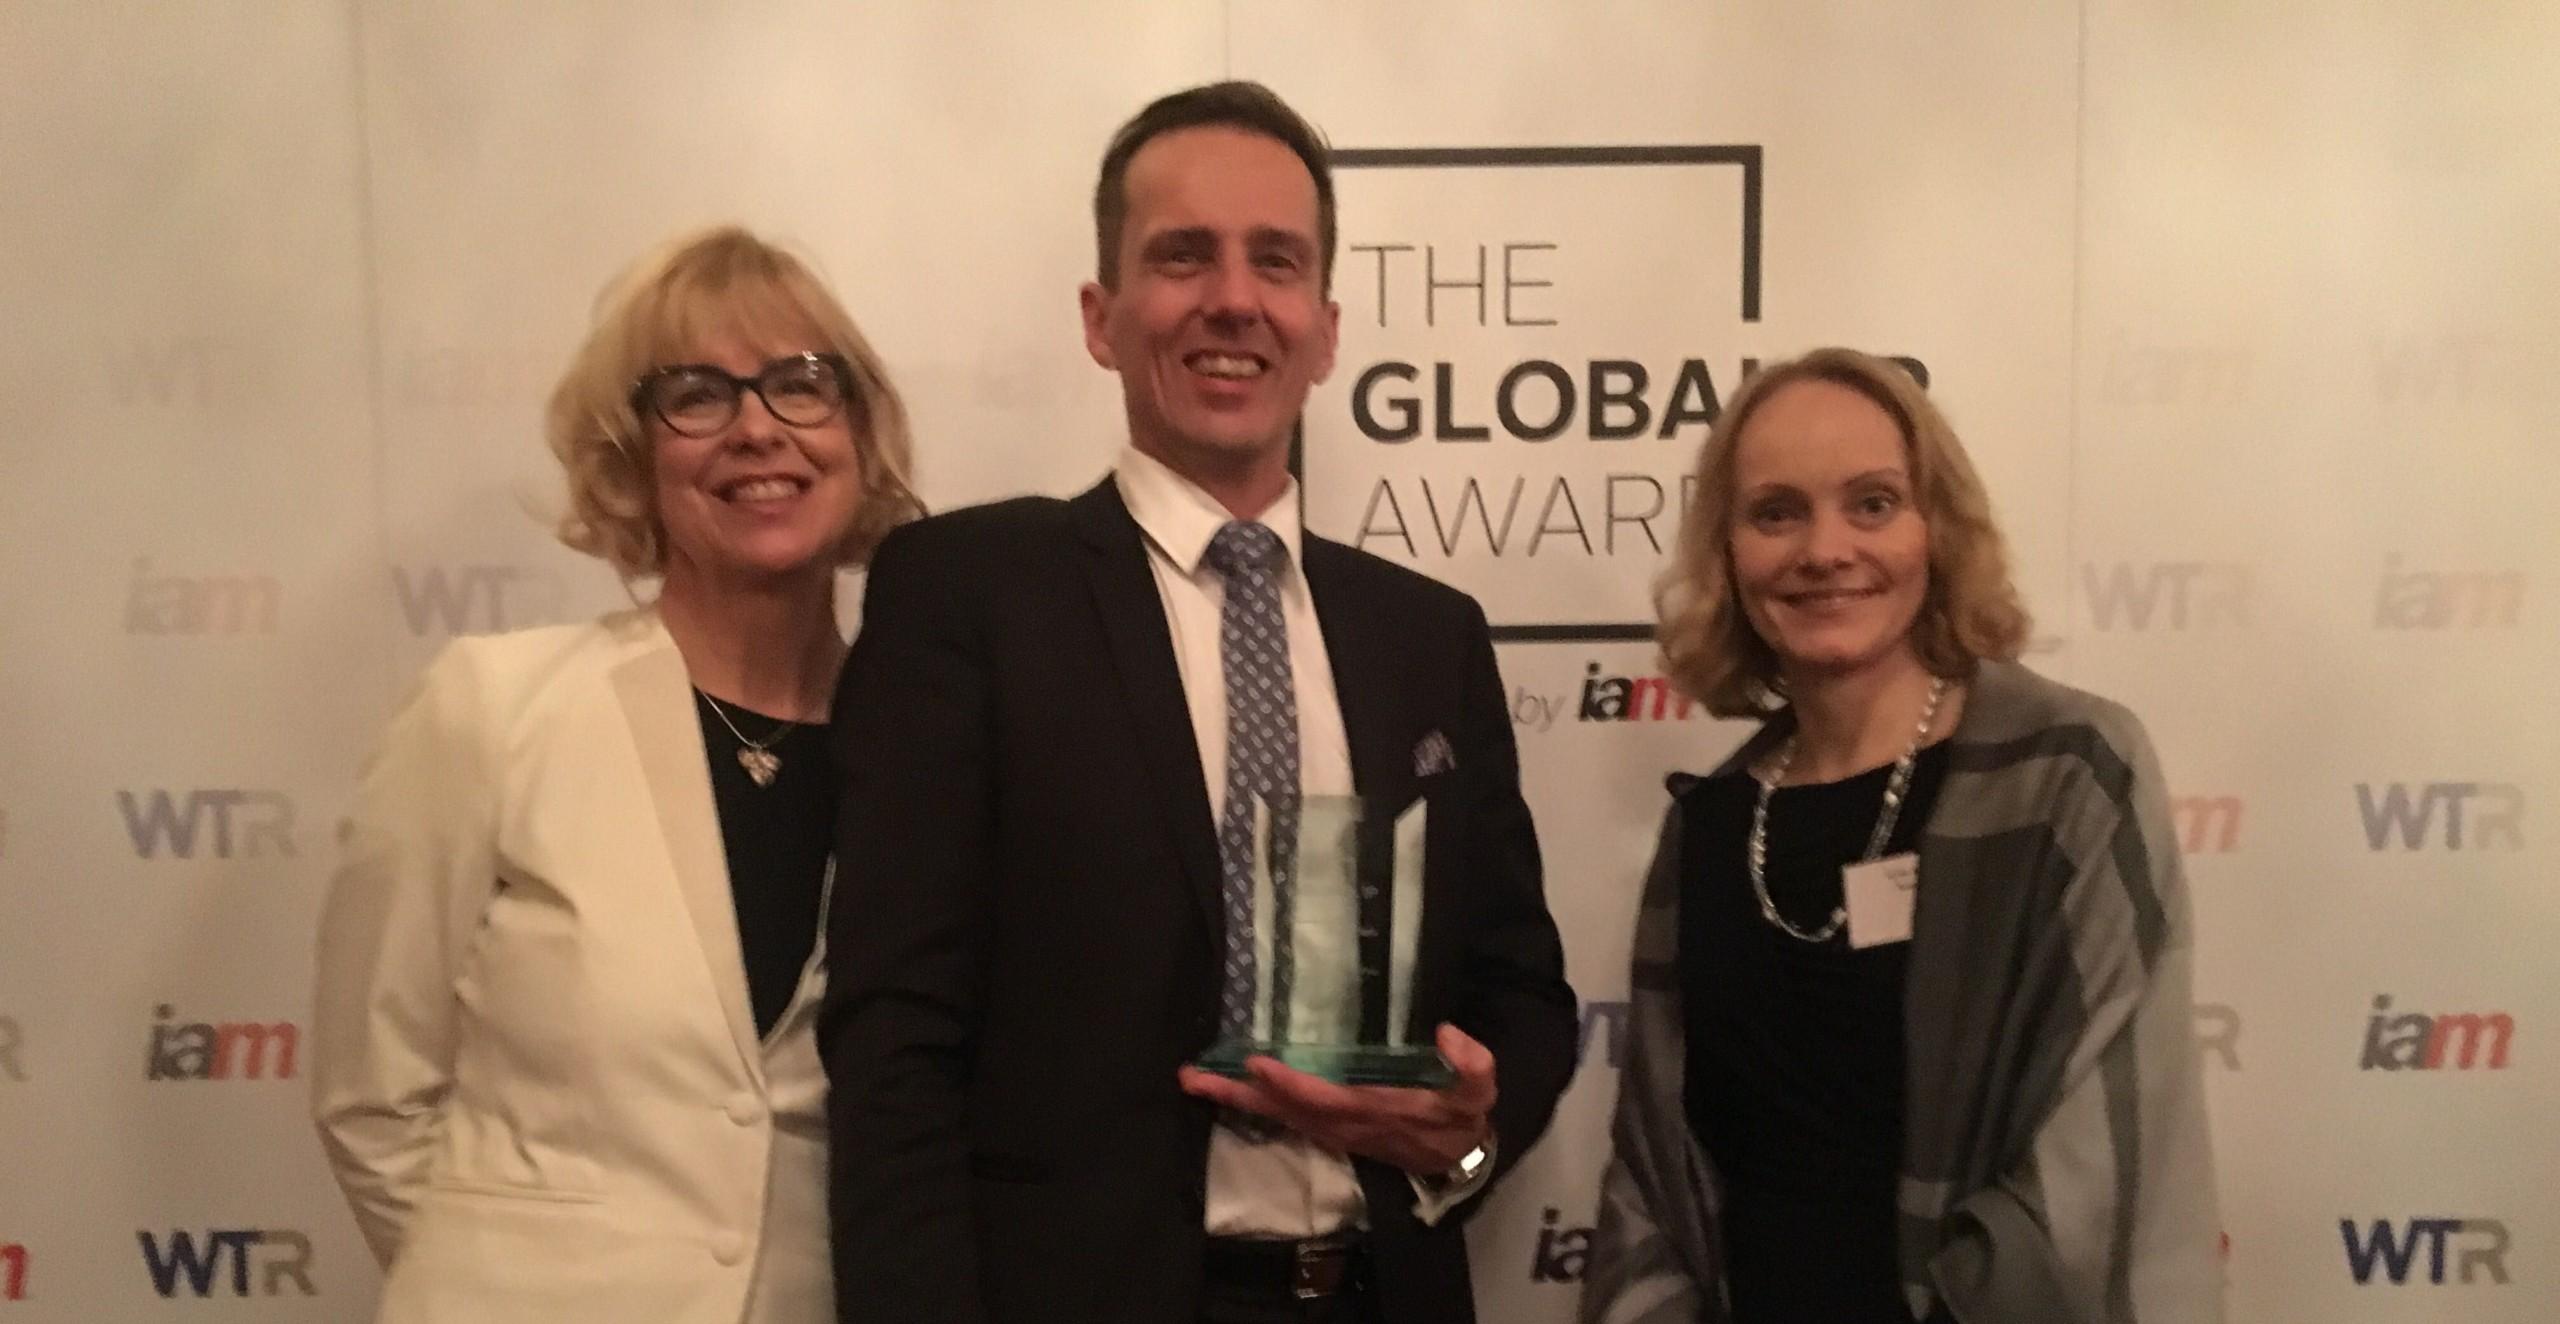 Boco IP recognized as patent prosecution firm of the year in Finland